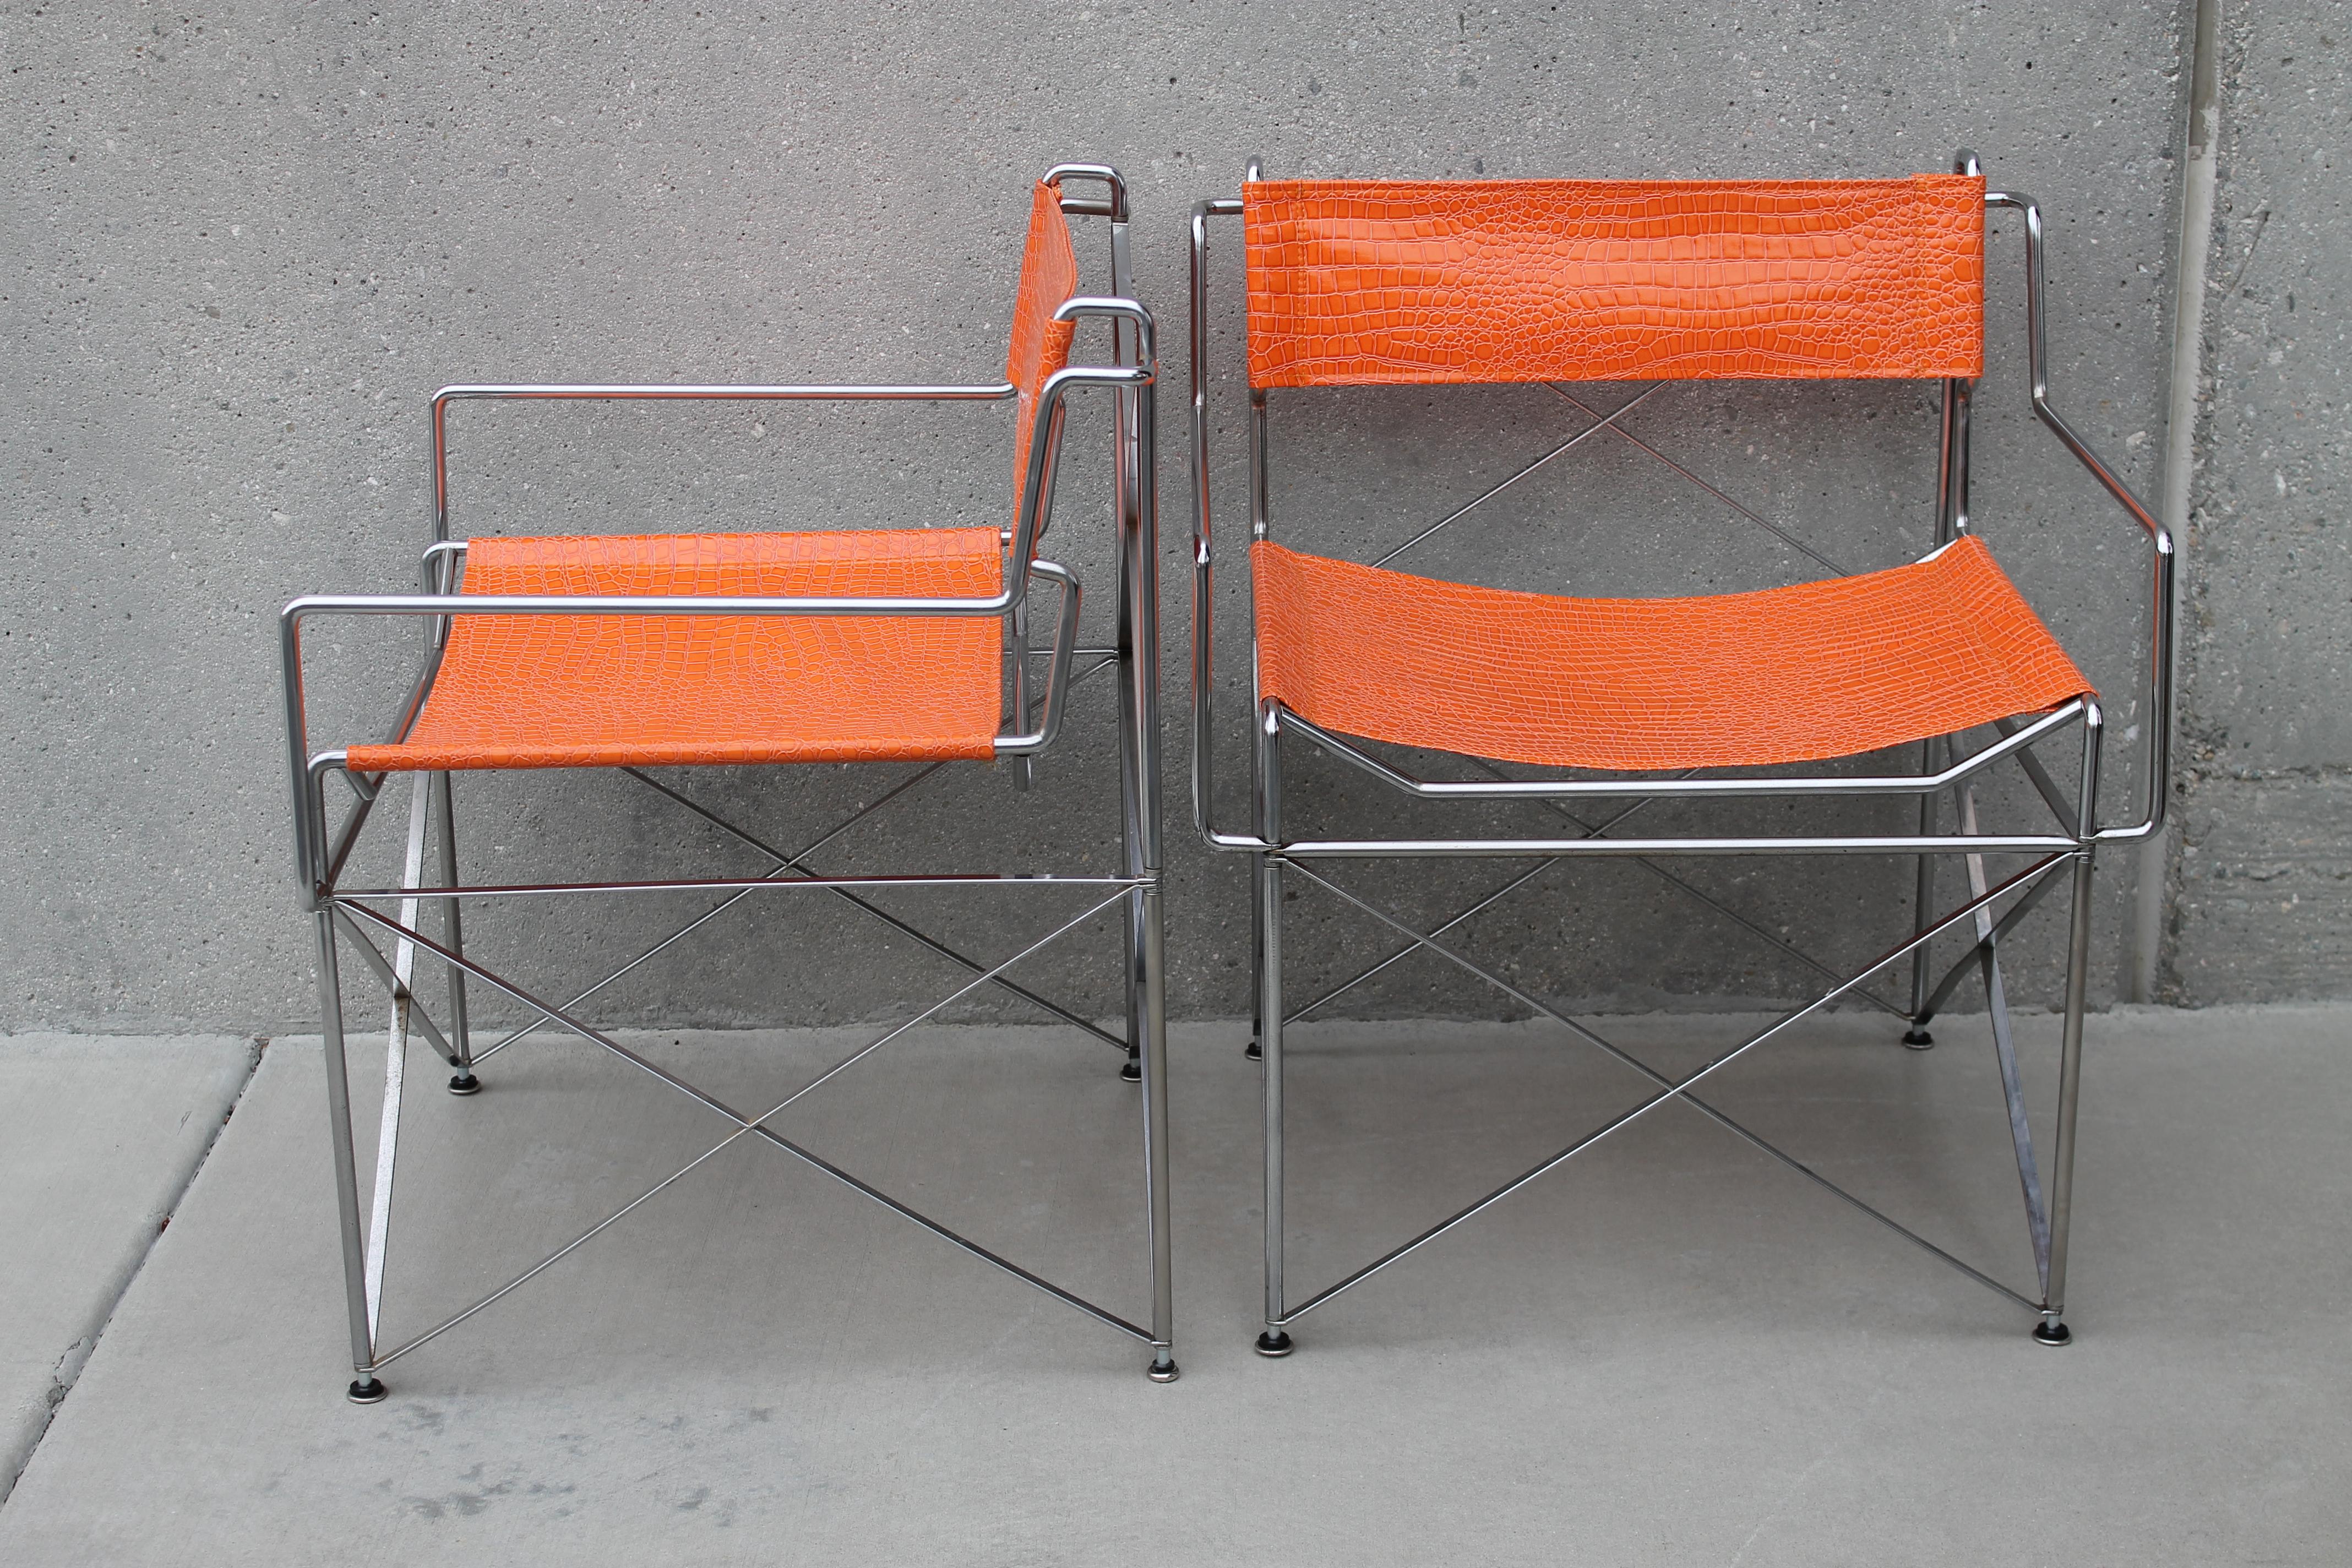 Pair of steel and faux alligator covered chairs. Each chair measures: 25